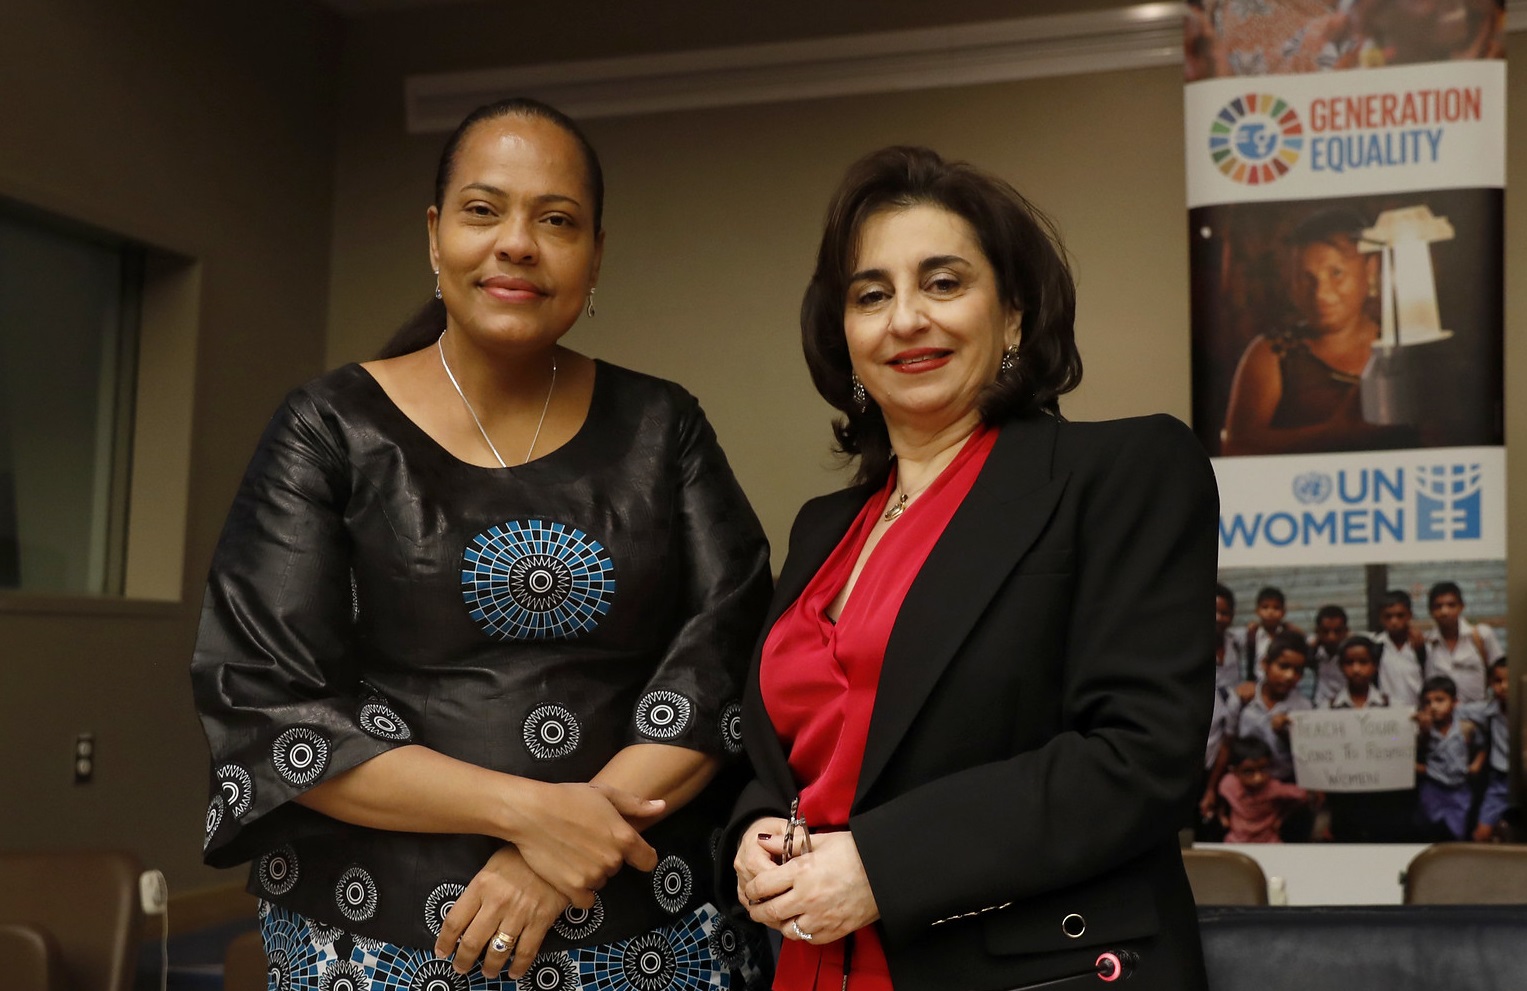 Ms. Angellah Kairuki, Minister of State United Republic of Tanzania, and Ms. Sima Bahous, Executive Director of UN Women, announced the Generation Equality Midpoint, which will be co-hosted by Tanzania. Photo: UN Women / Ryan Brown